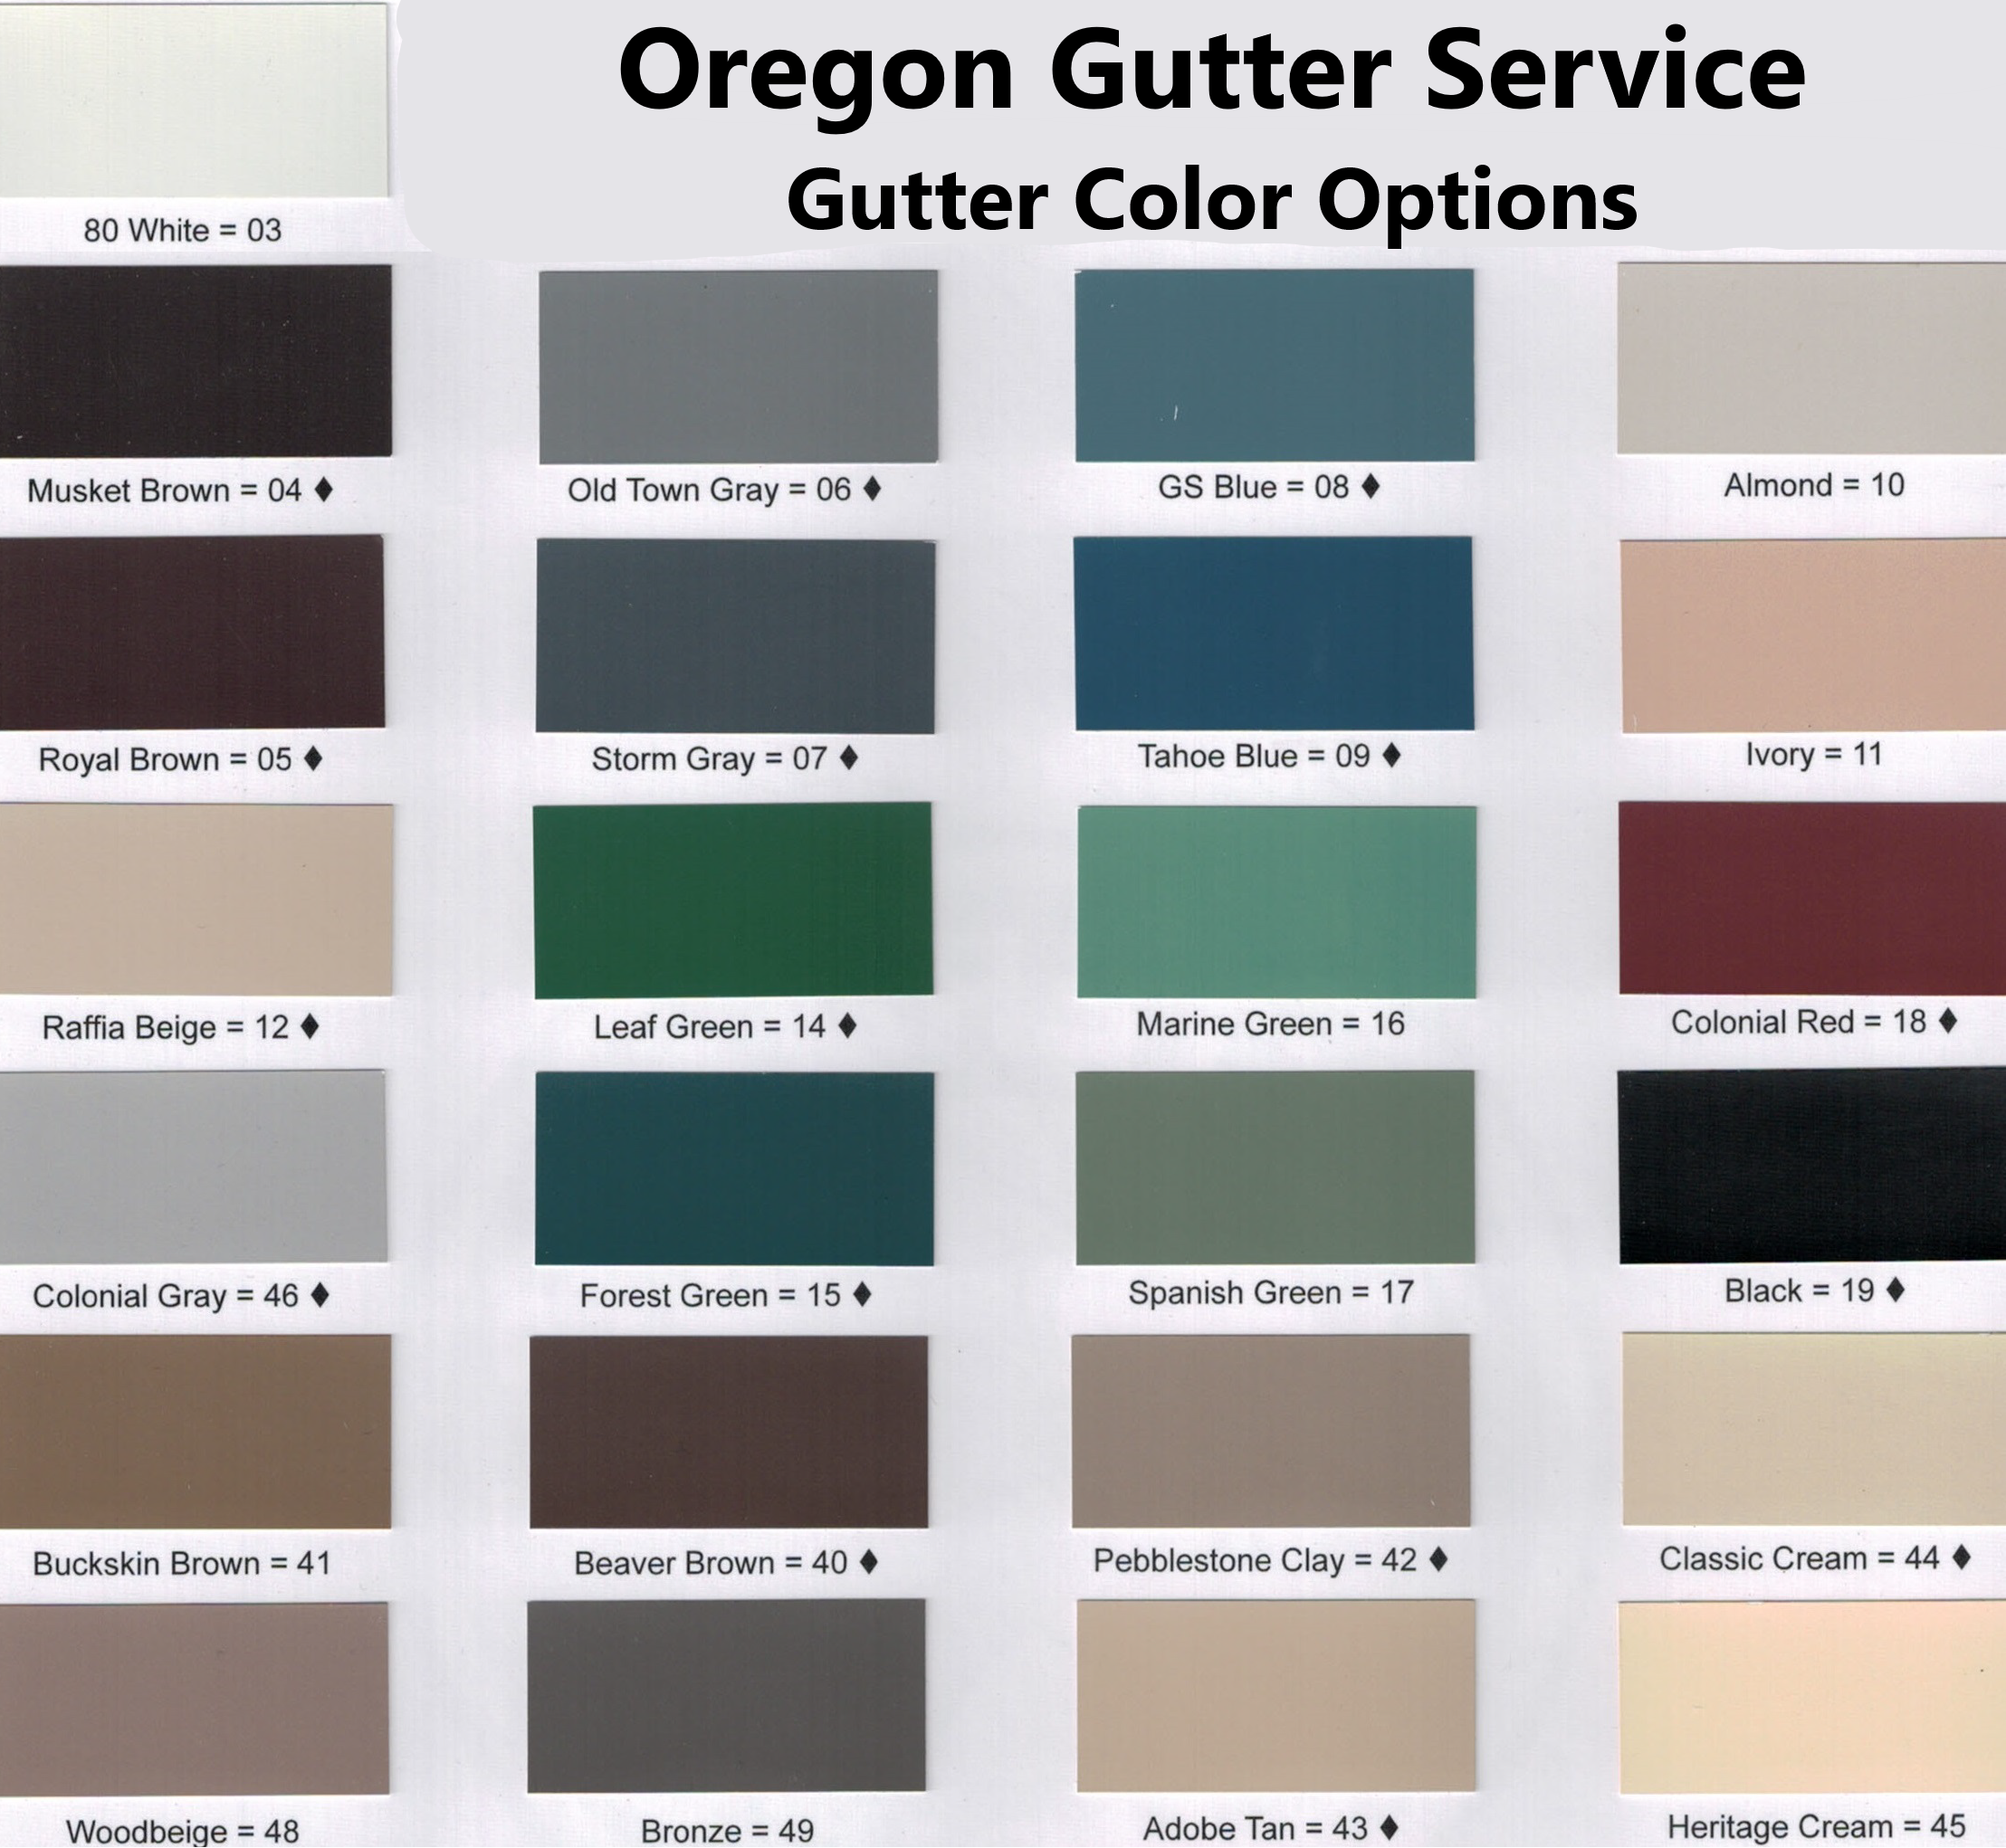 Available Gutter Color Choices